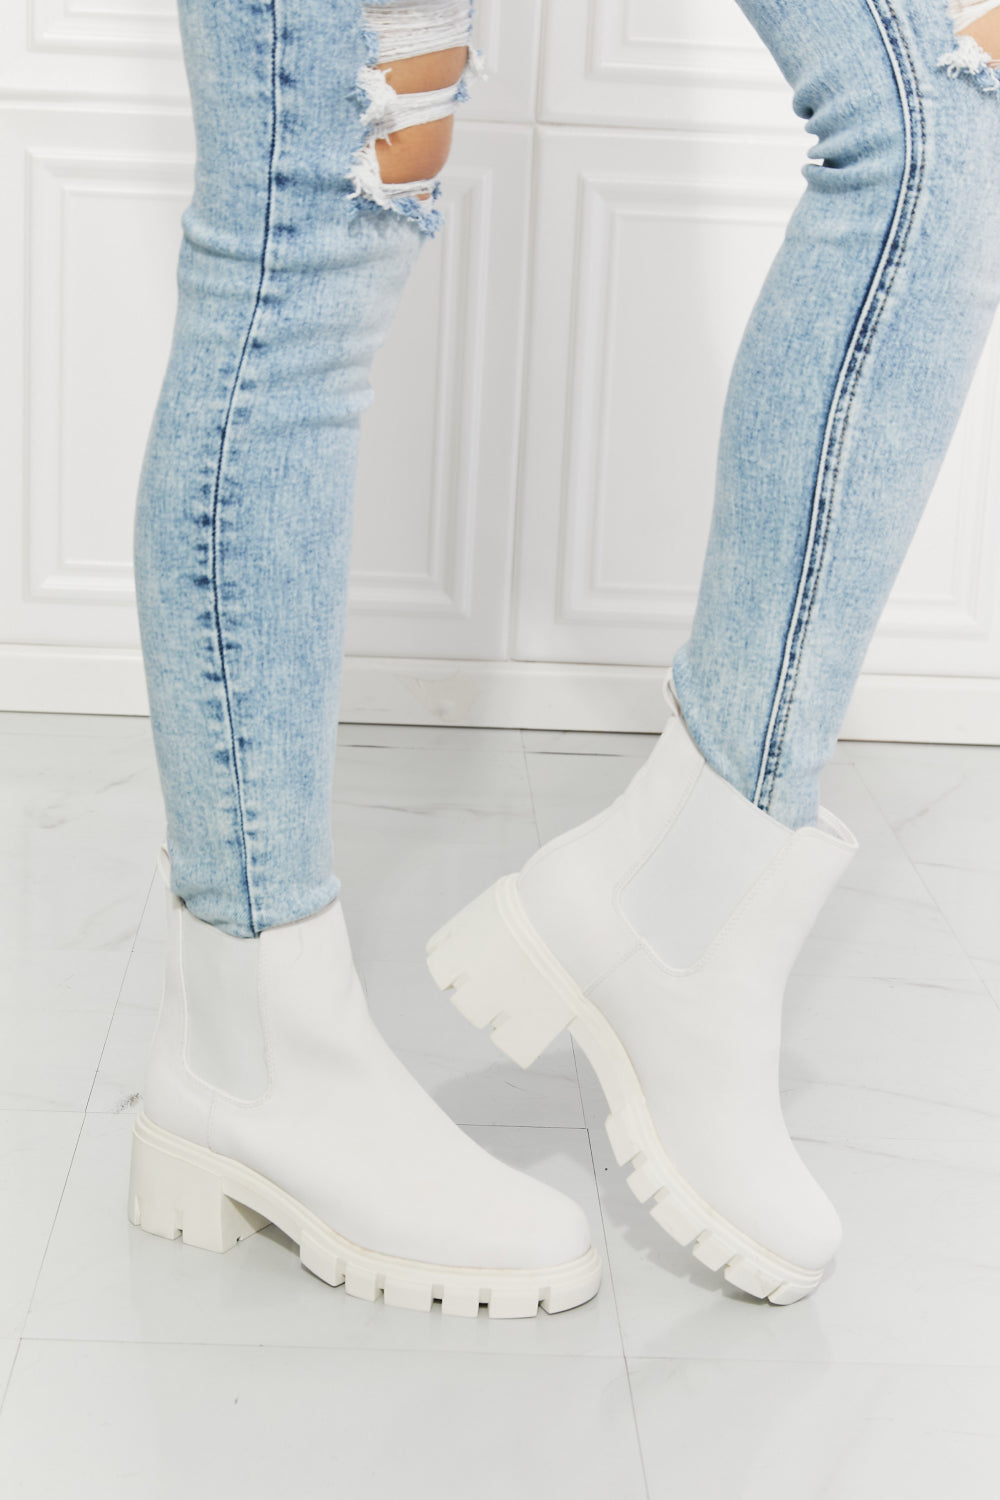 MMShoes Work For It Matte Lug Sole Chelsea Boots in White - Ryzela